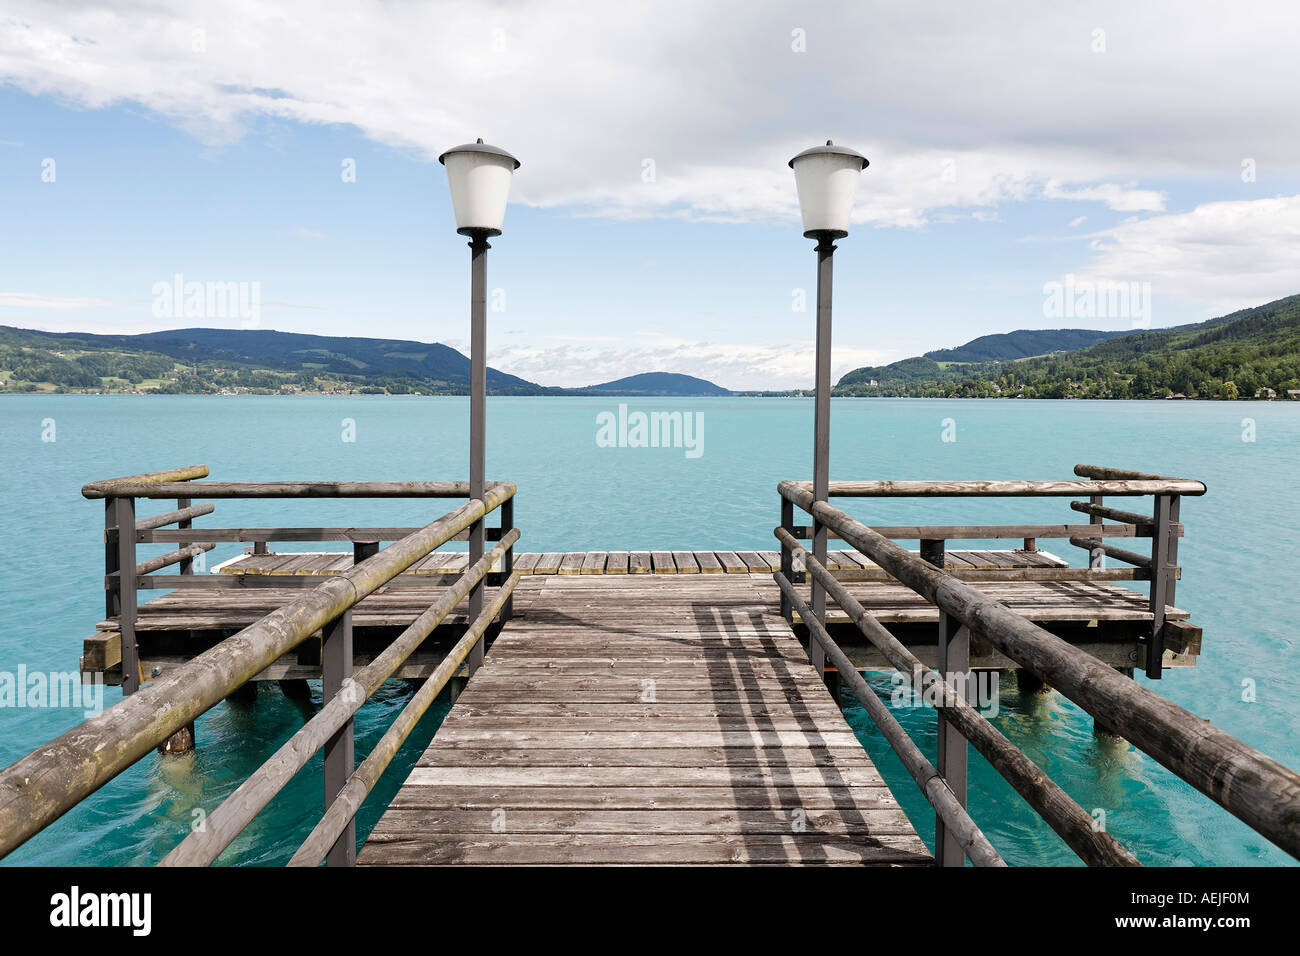 Wooden landing stage one the edge of the lake Attersee, Salzkammergut, Upper Austri Stock Photo